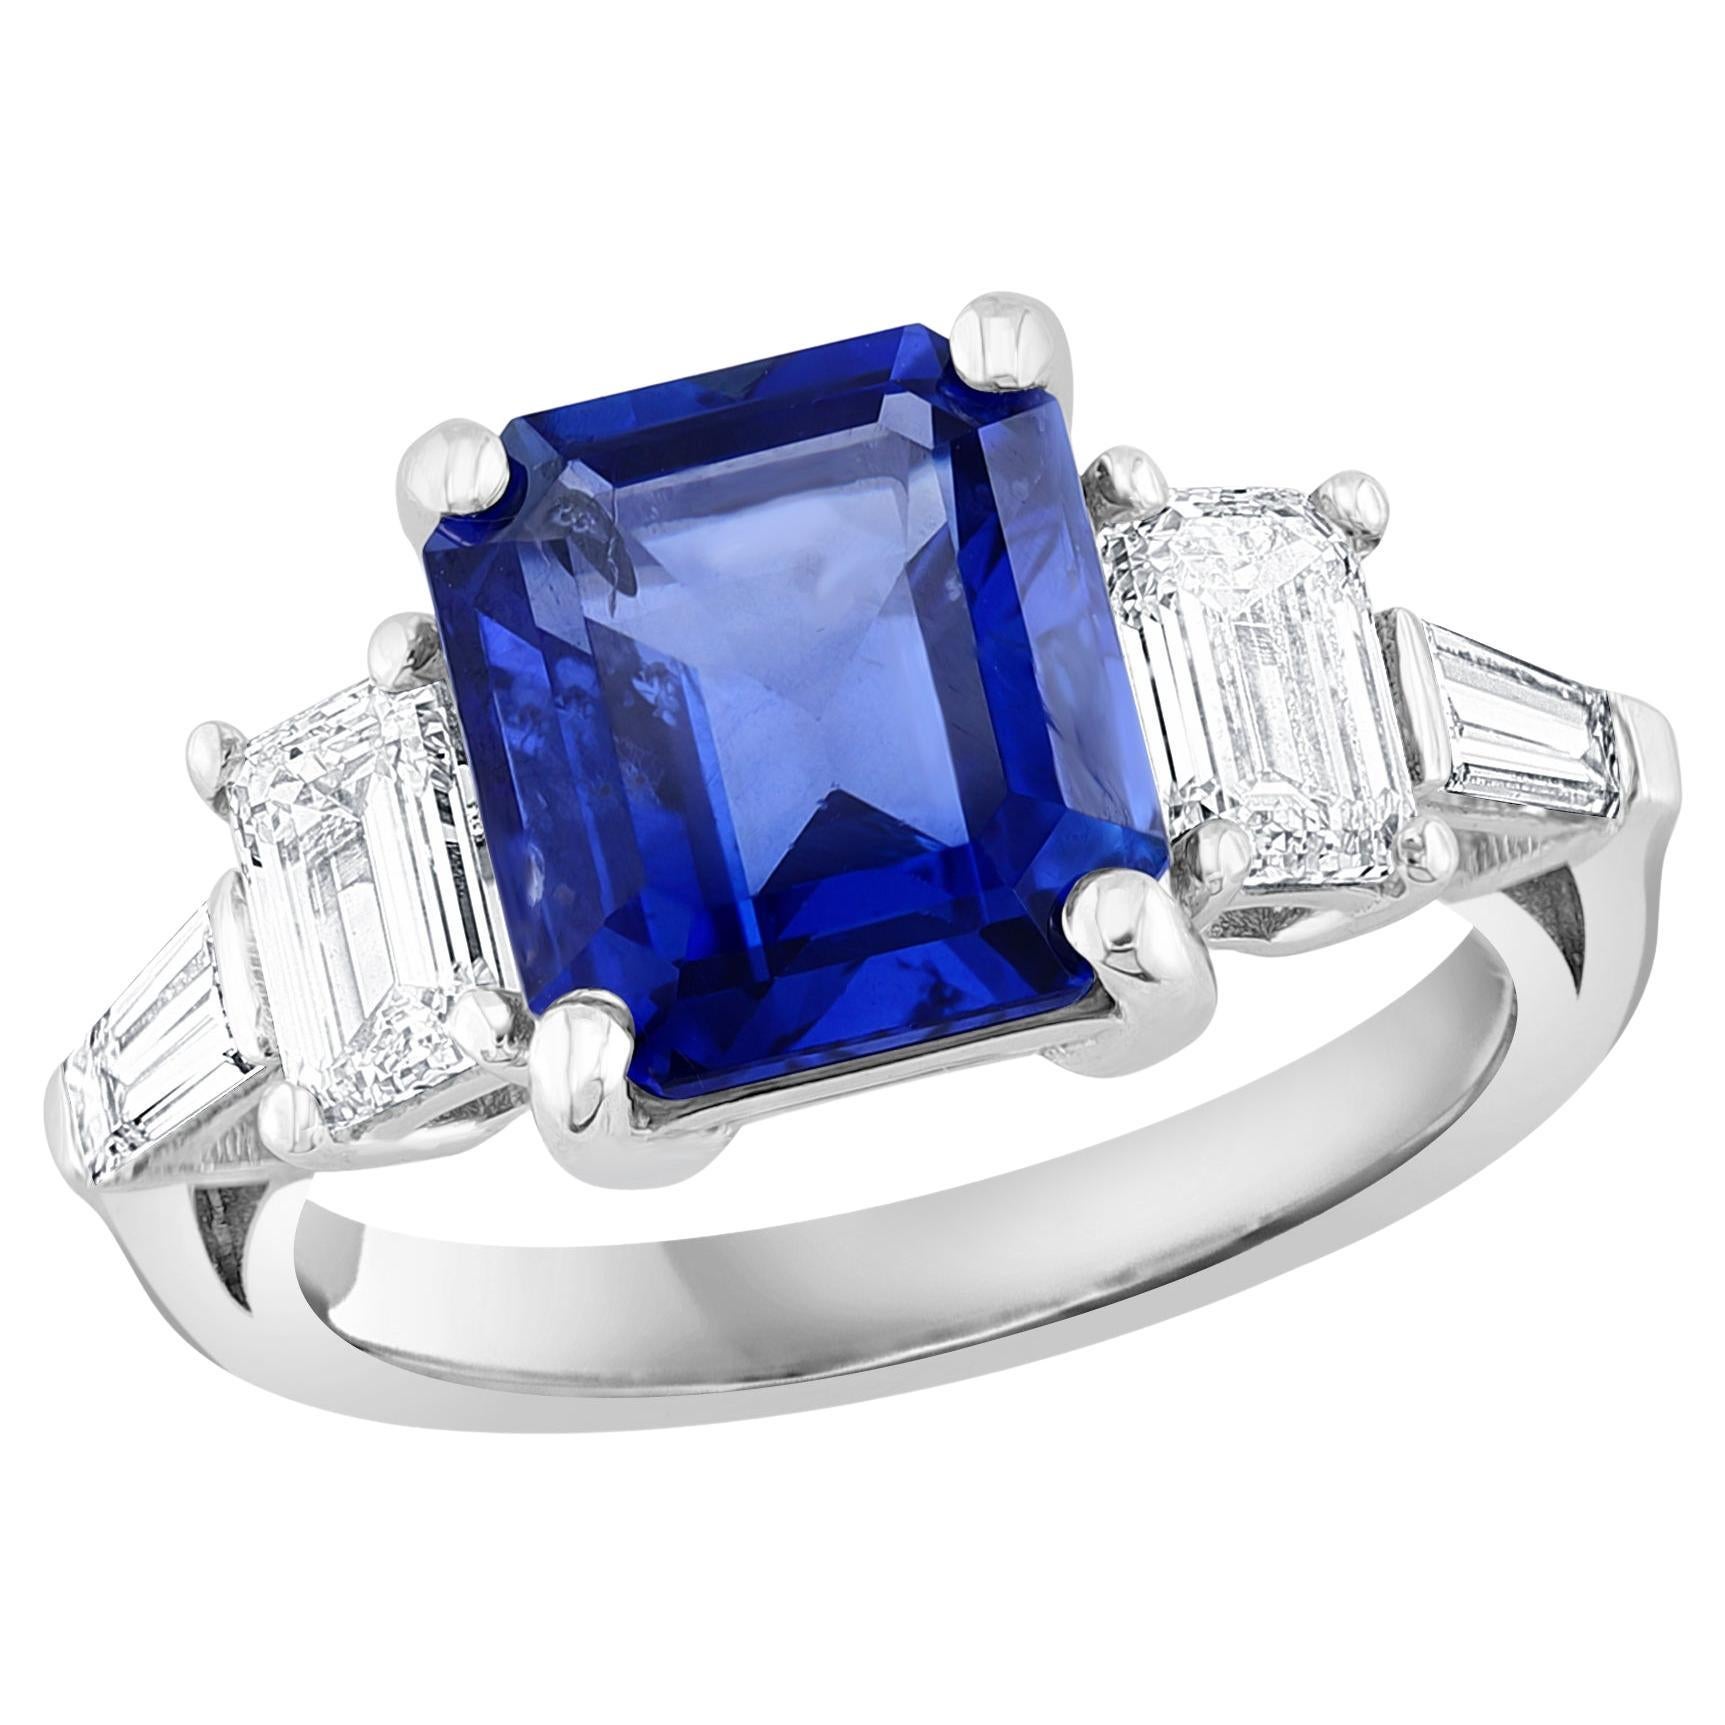 Certified 4.74 Carat Emerald Cut Sapphire and Diamond Five-Stone Engagement Ring For Sale